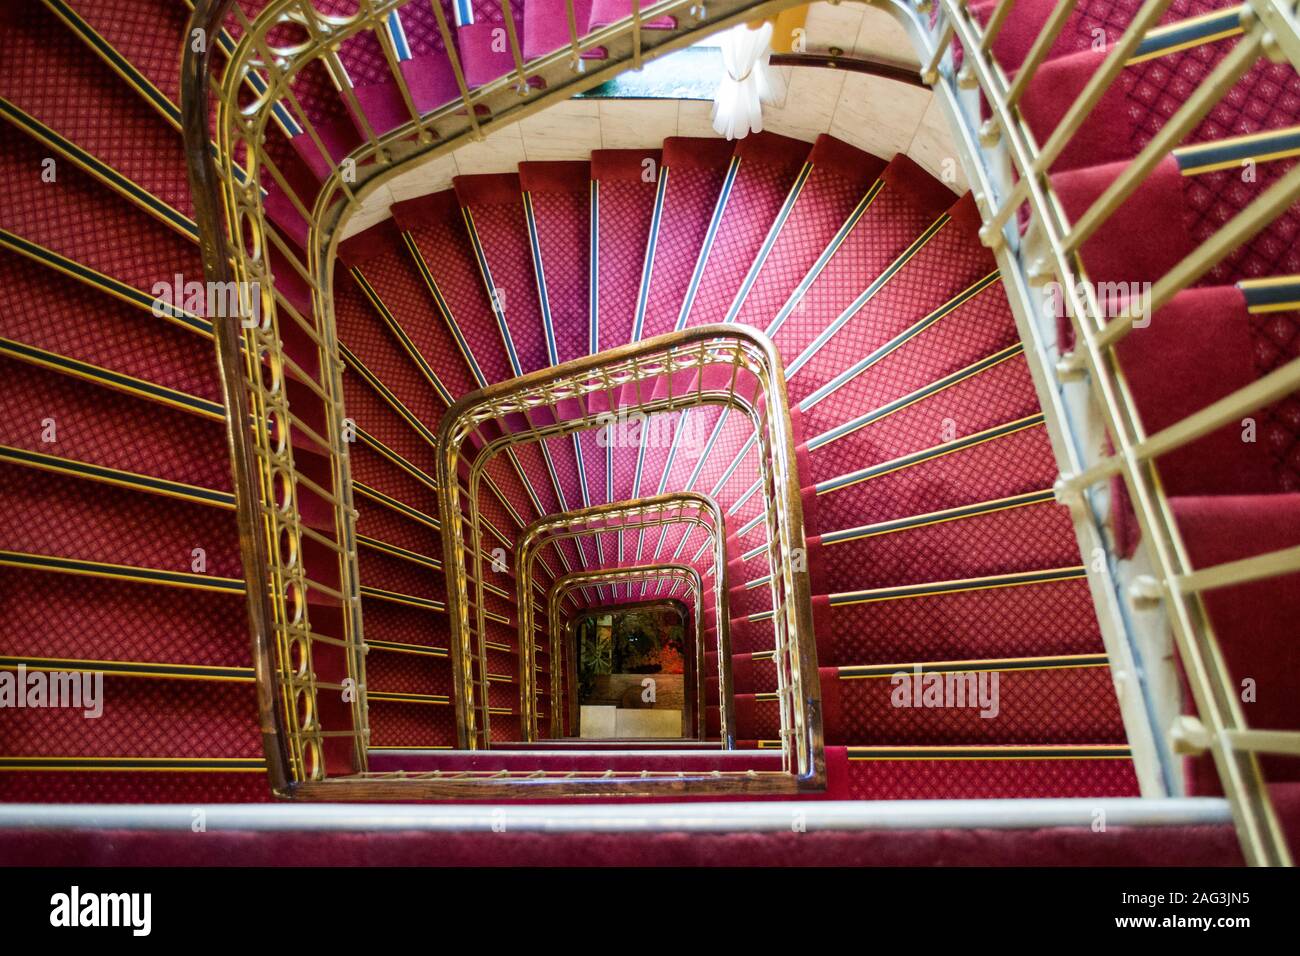 High angle shot of a pink spiral staircase with golden handles in a beautiful building Stock Photo